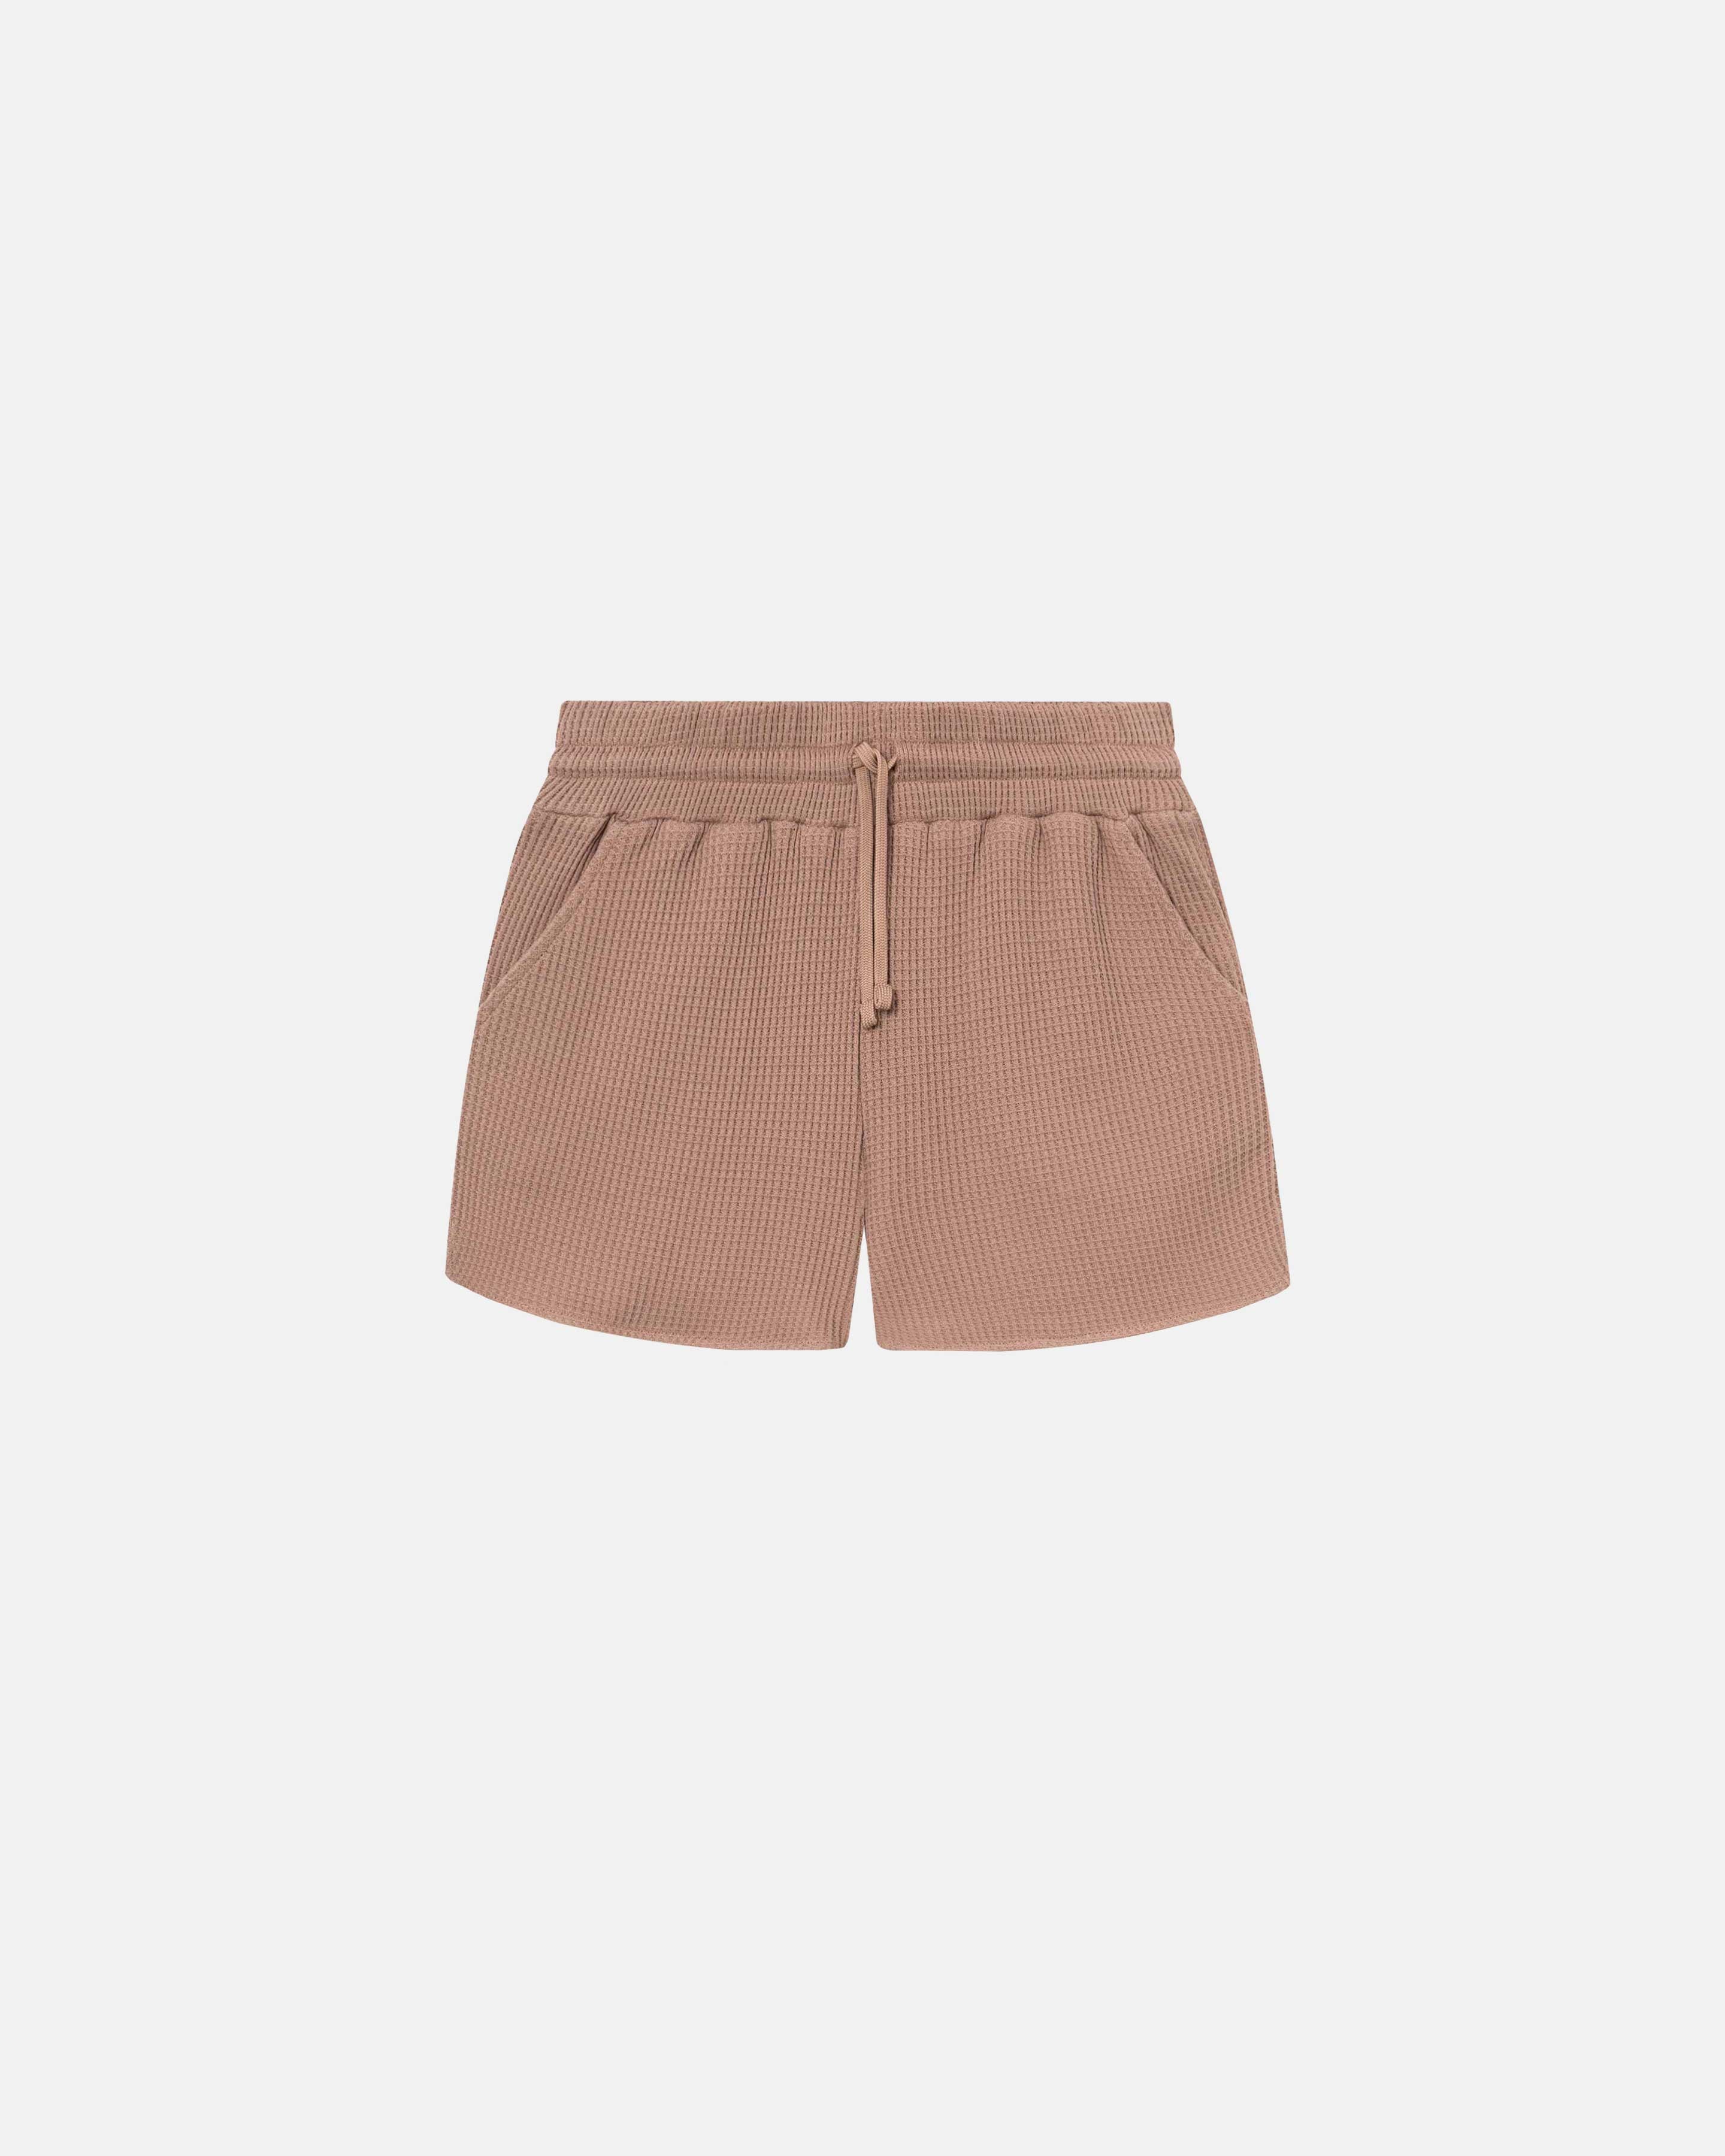 Brown waffle-patterned short-length shorts with two front pockets and a drawstring.